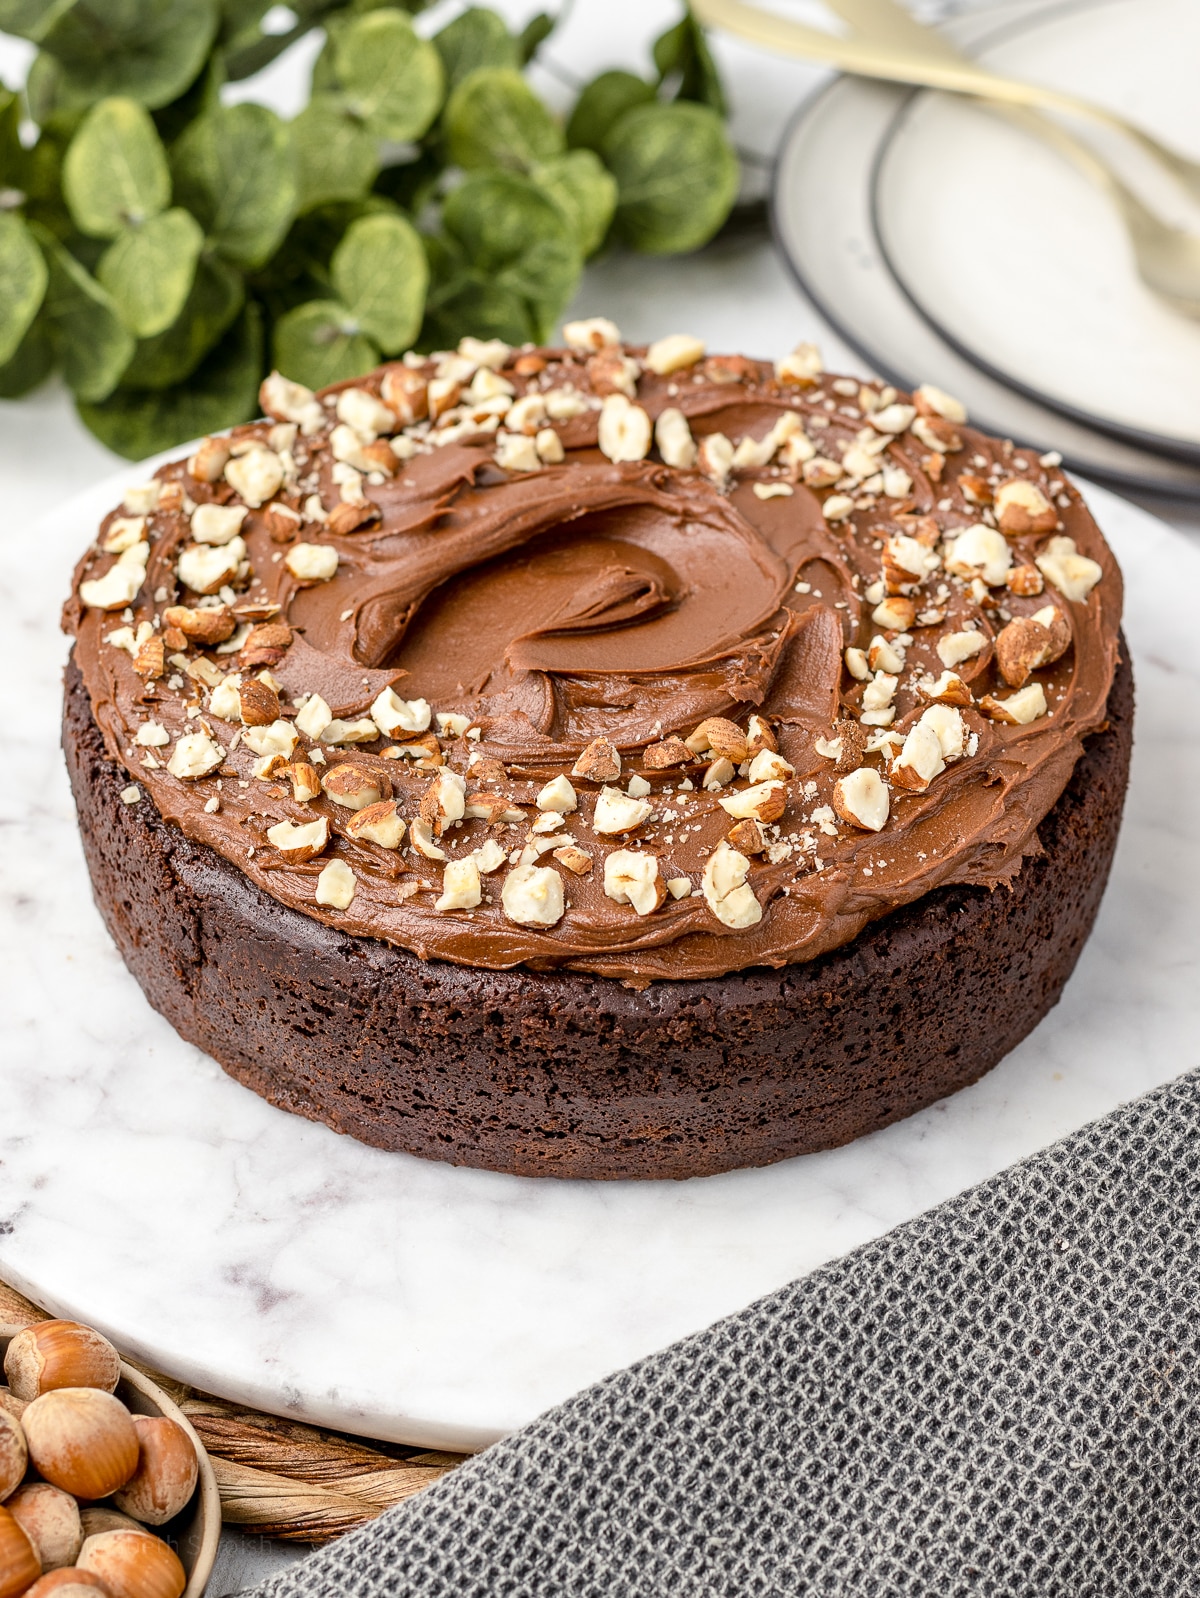 Decorated Chocolate Nutella Cake with Nutella Buttercream and chopped hazelnuts on top.